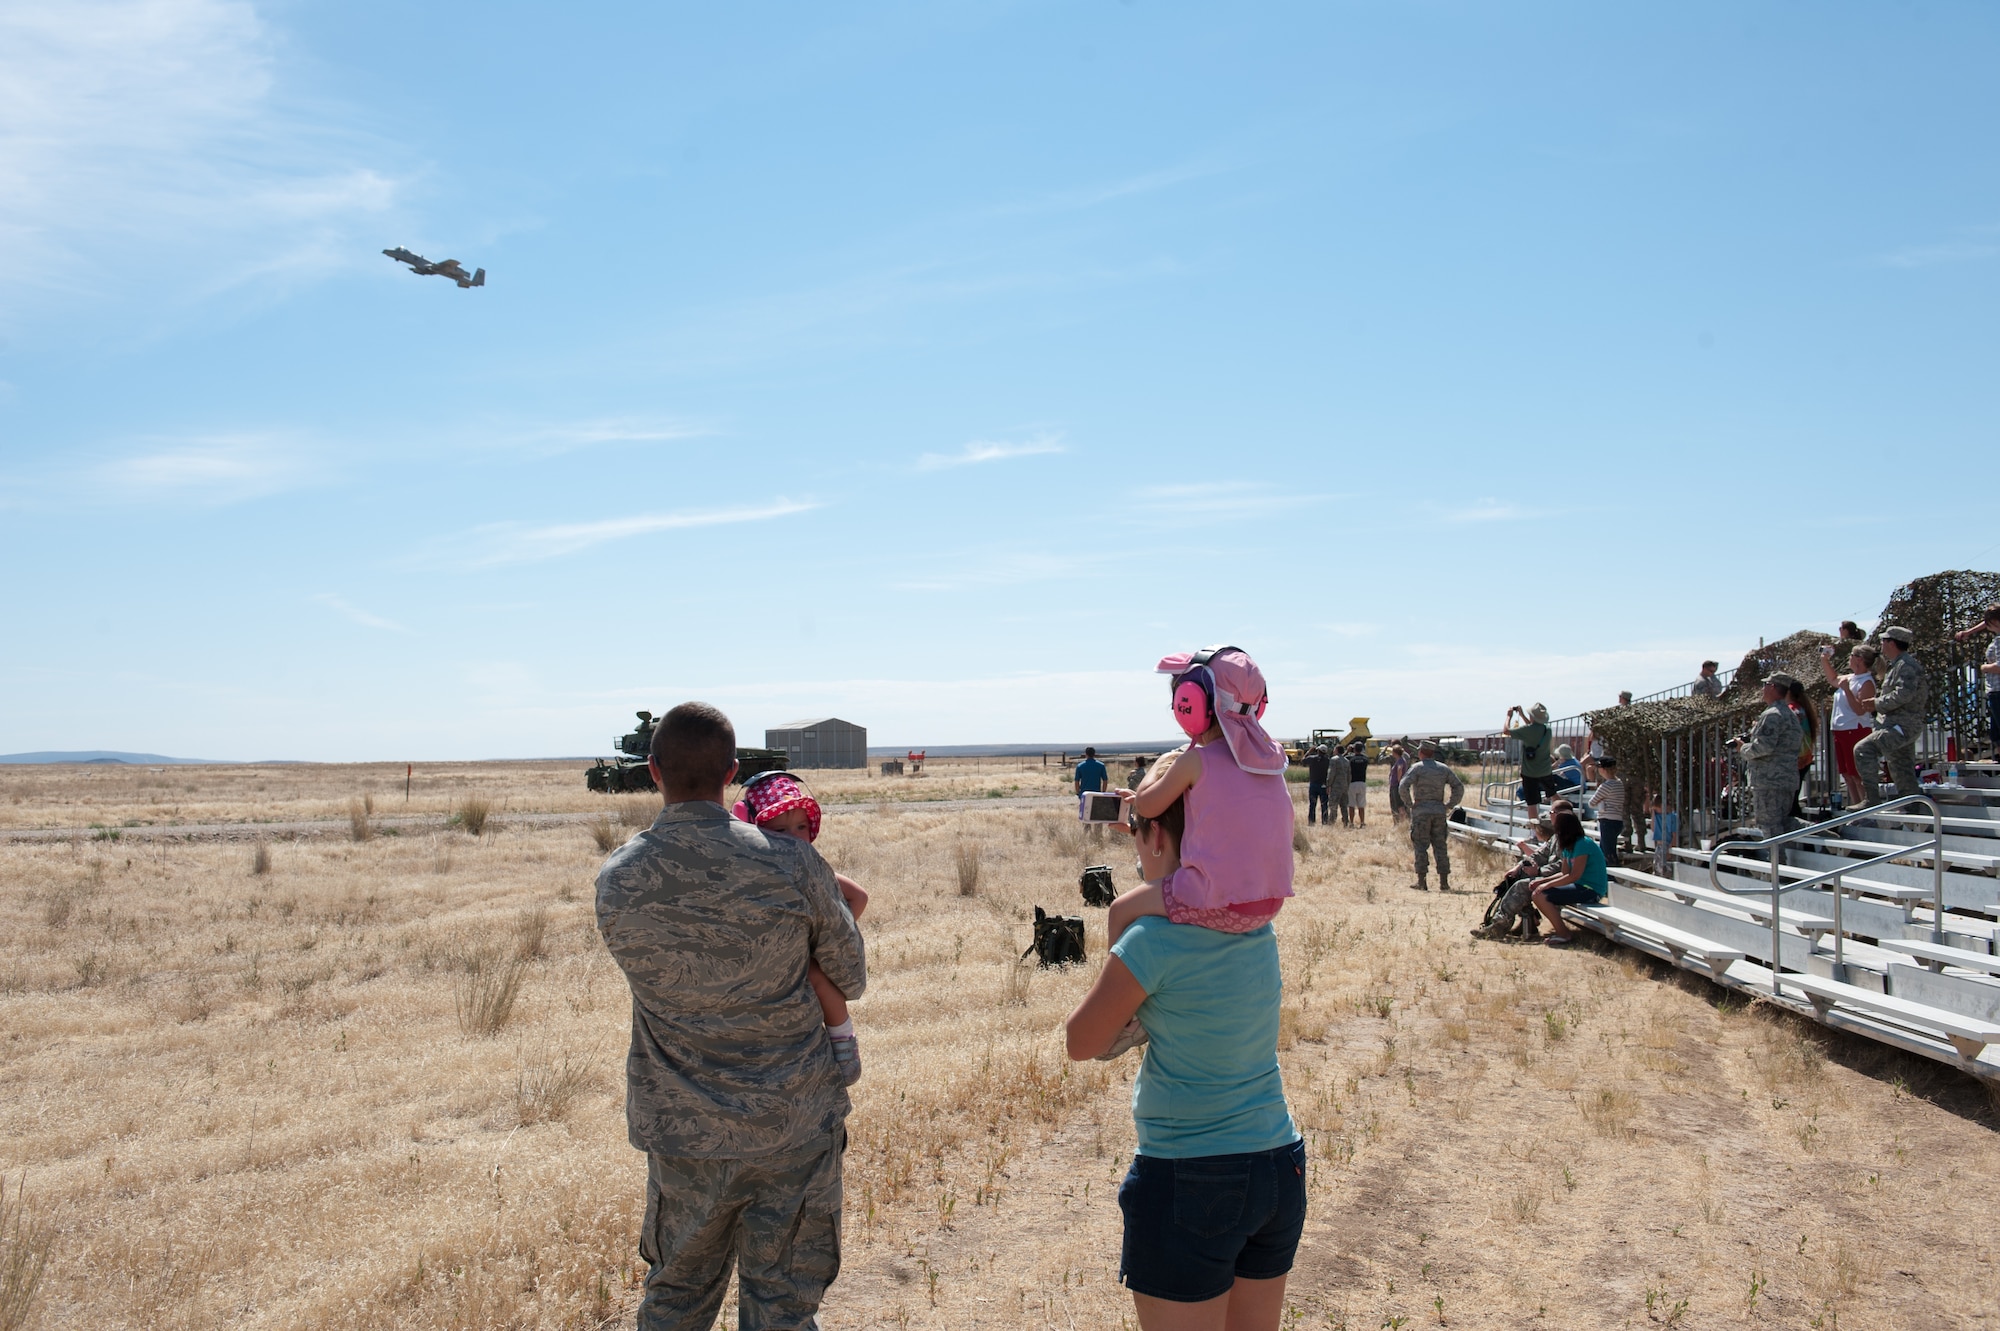 Maj. Shawn Scott and his family watch an A-10 Thunderbolt II make a strafing pass at Saylor Creek range Aug. 5 as part of the 124th Air Support Operations Squadron's Kin Appreciation Day. During the event family and loved ones were able to see up close the equipment joint terminal attack controllers use in training and combat, as well as eat lunch and watch A-10 Thunderbolt II's conduct strafing runs with their GAU-8 gatling cannon.


